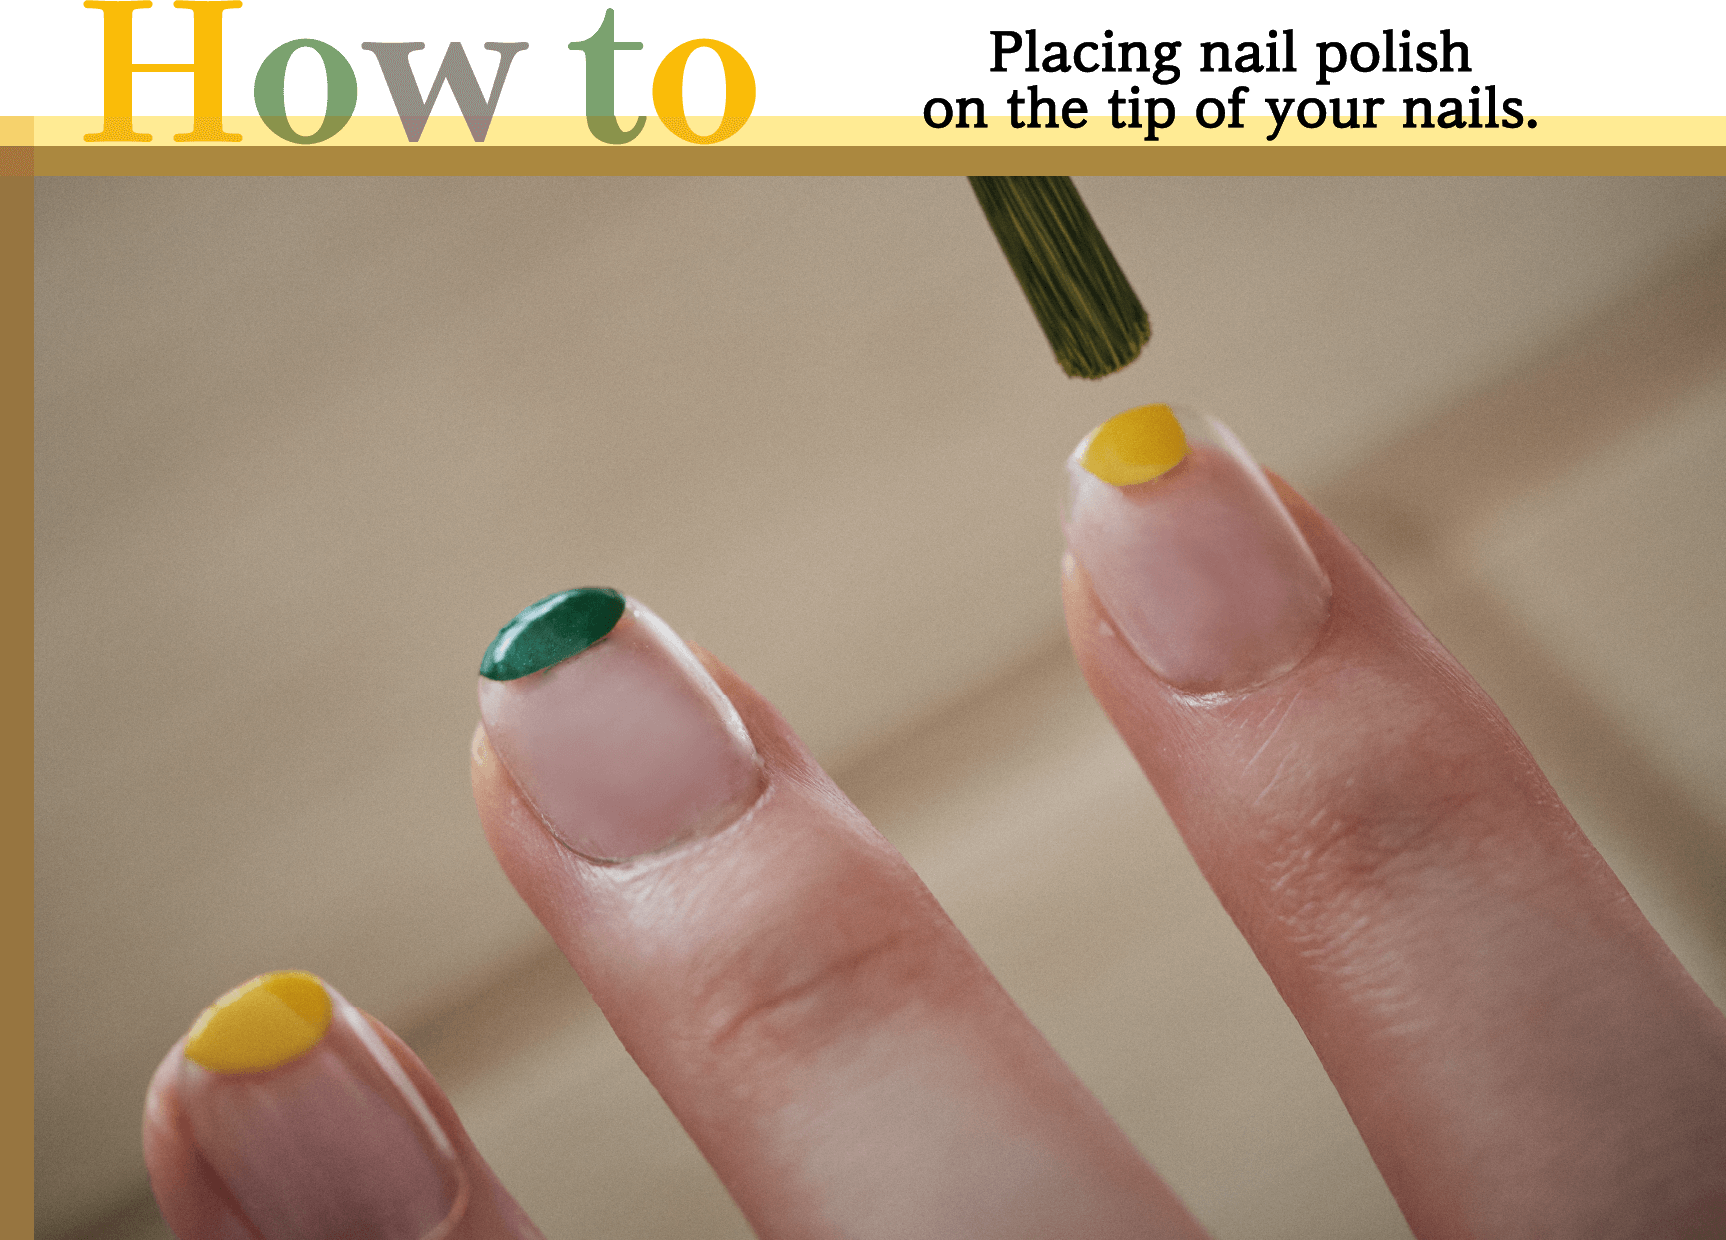 How to Placing nail polish on the tip of your nails.